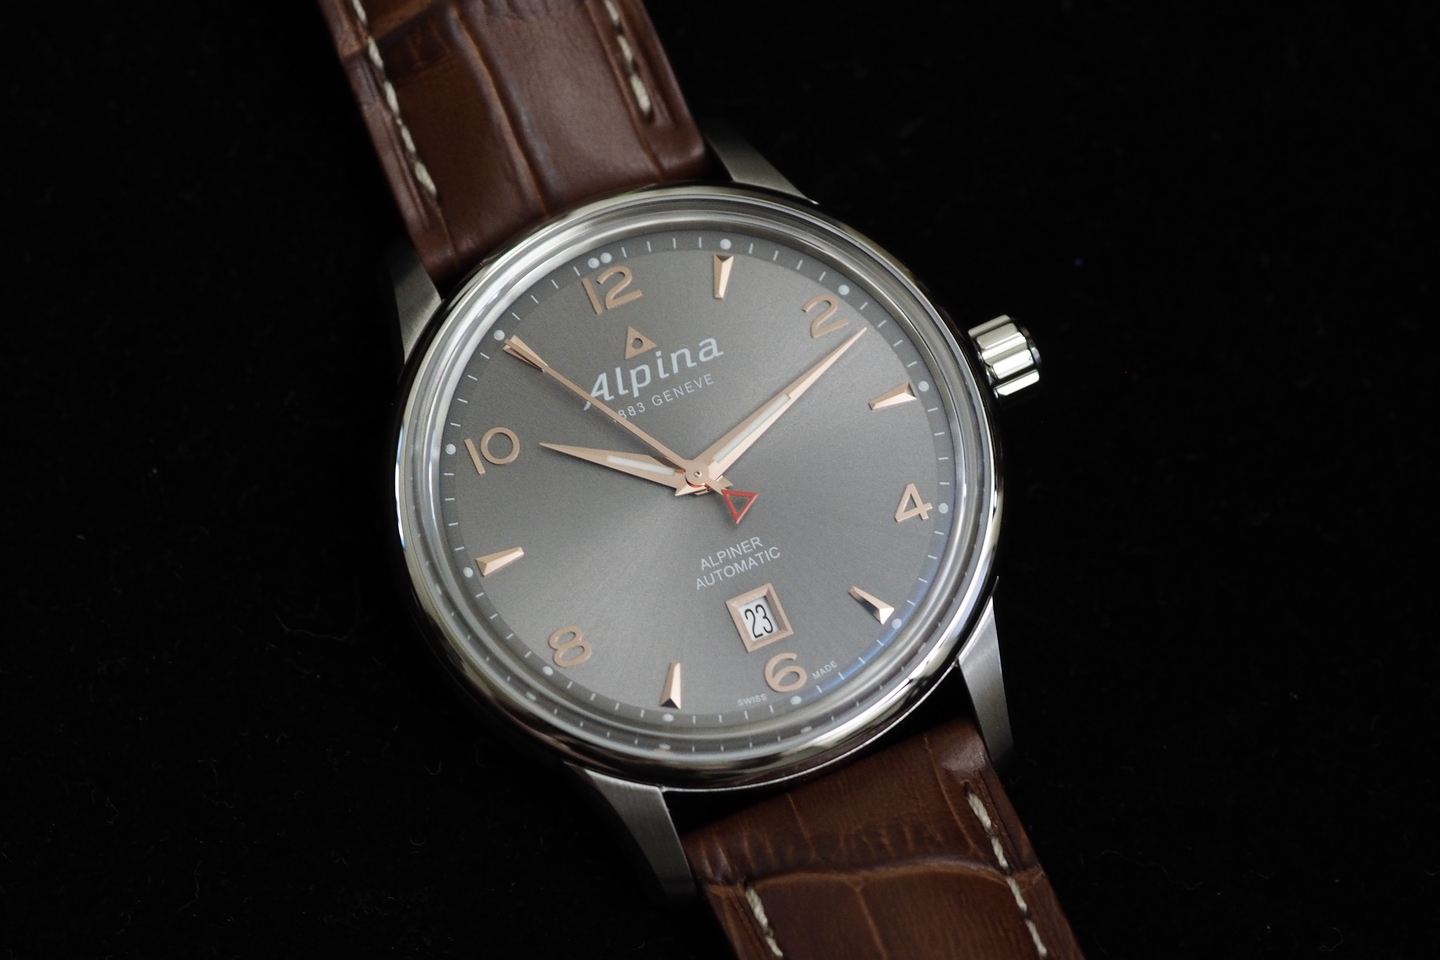 REVIEW: The Alpina Alpiner Automatic